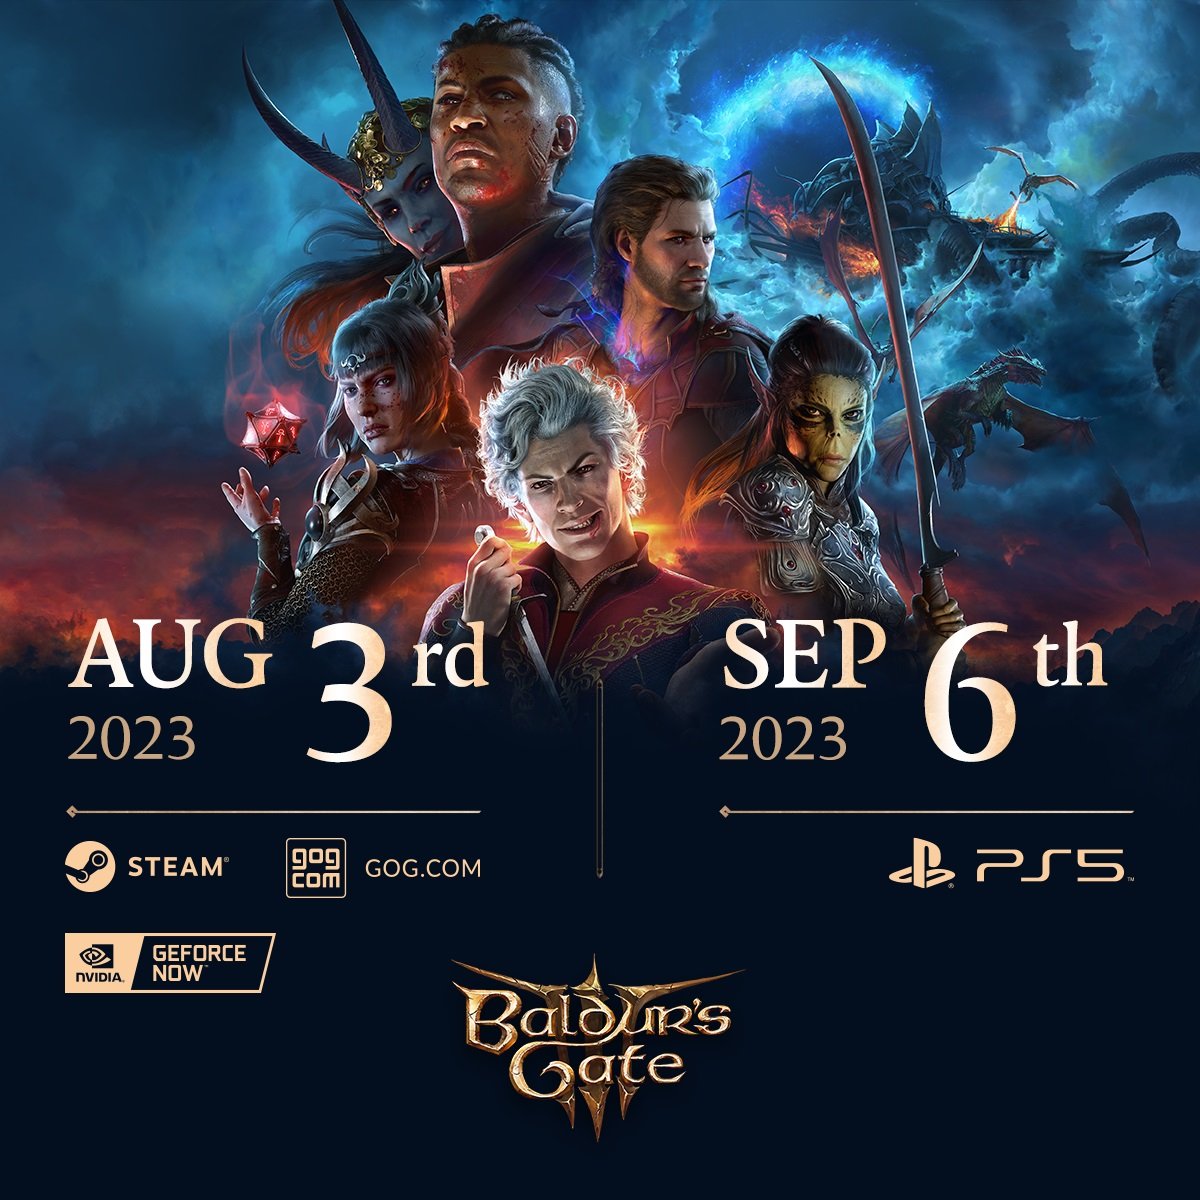 Baldur's Gate 3 on PlayStation 5  Everything you need to know 